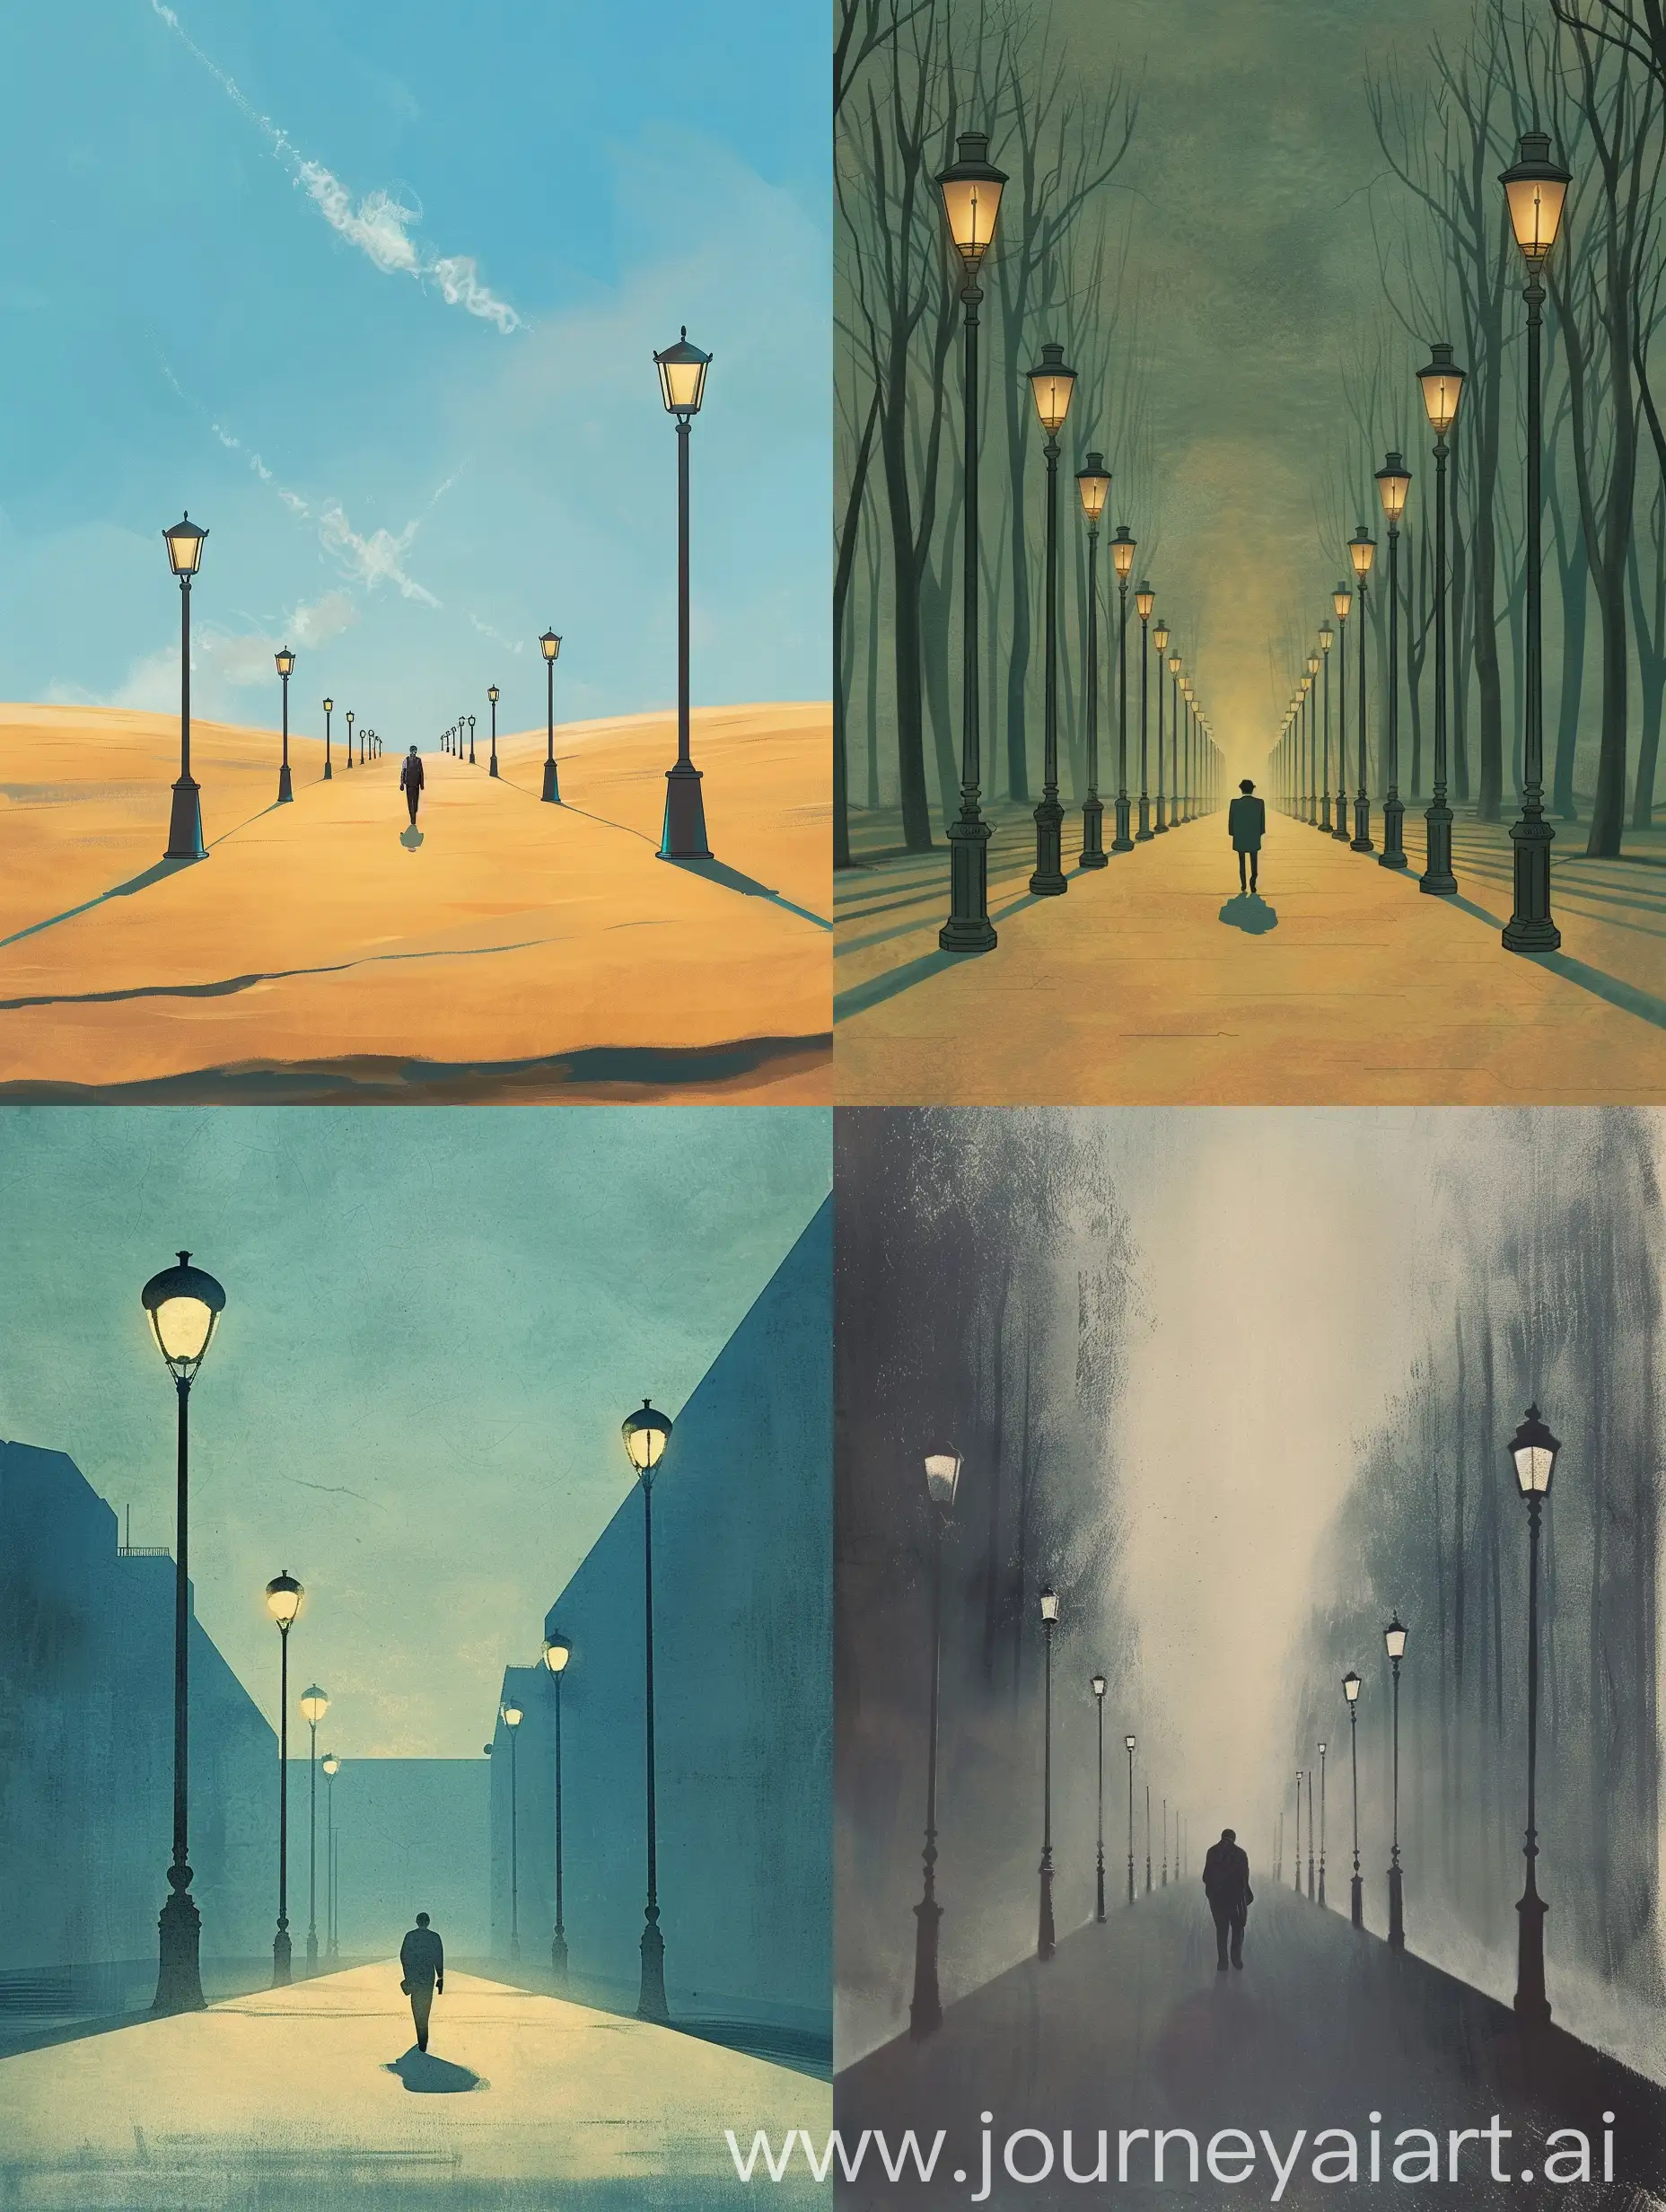 Studio ghibli Illustration of a man walking in a alone road , lamp post in both side of road,Cimematic , tall size image 